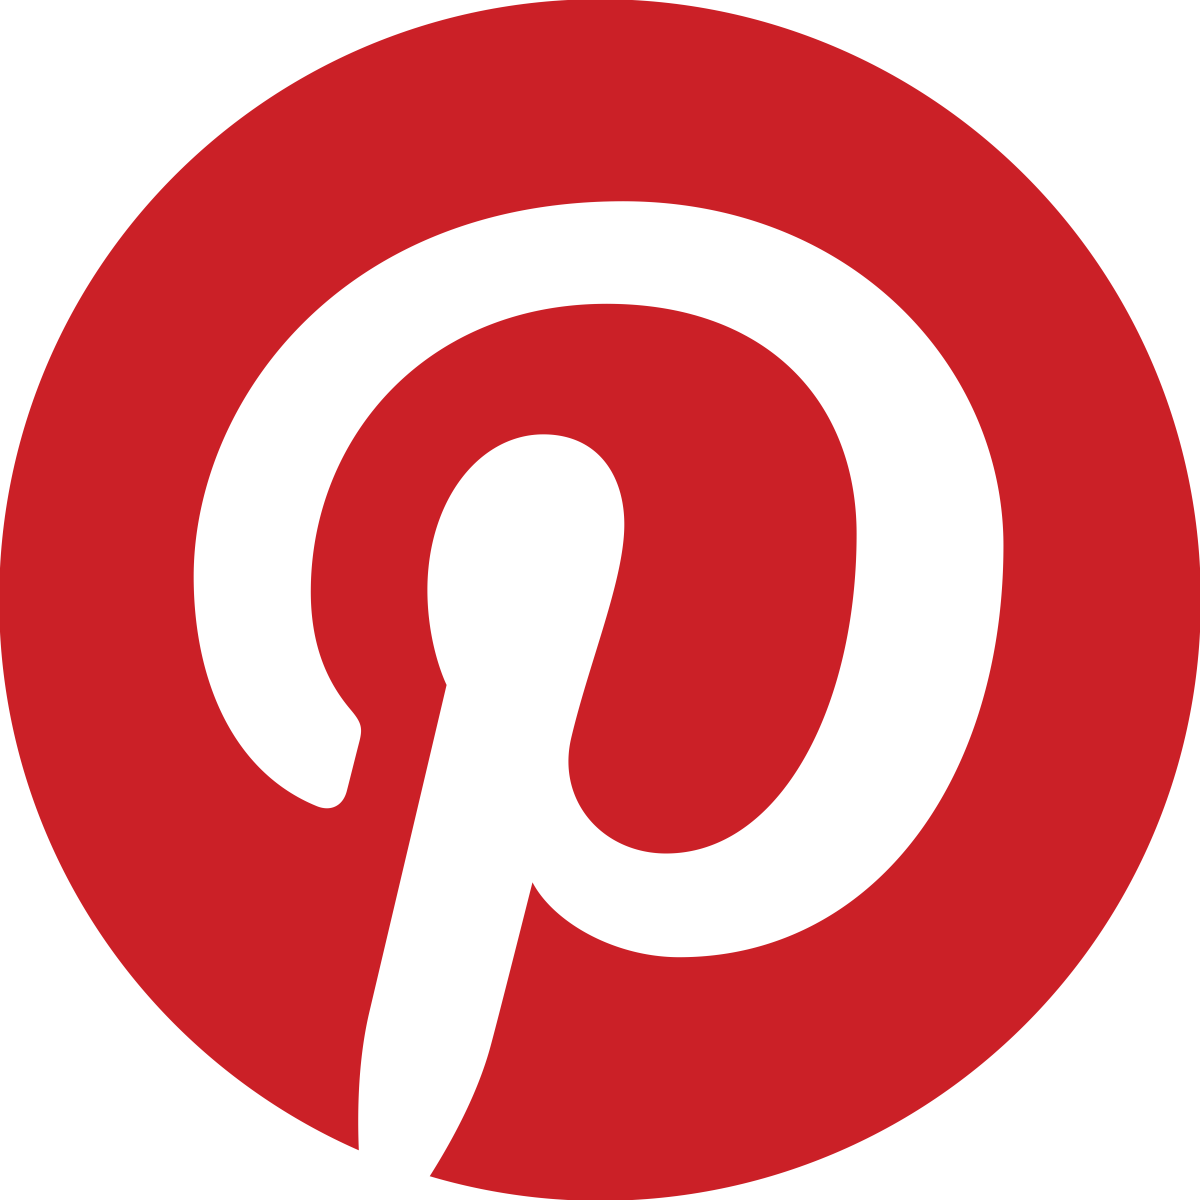 Upload Pinterest file to your website server to verify website with Pinterest